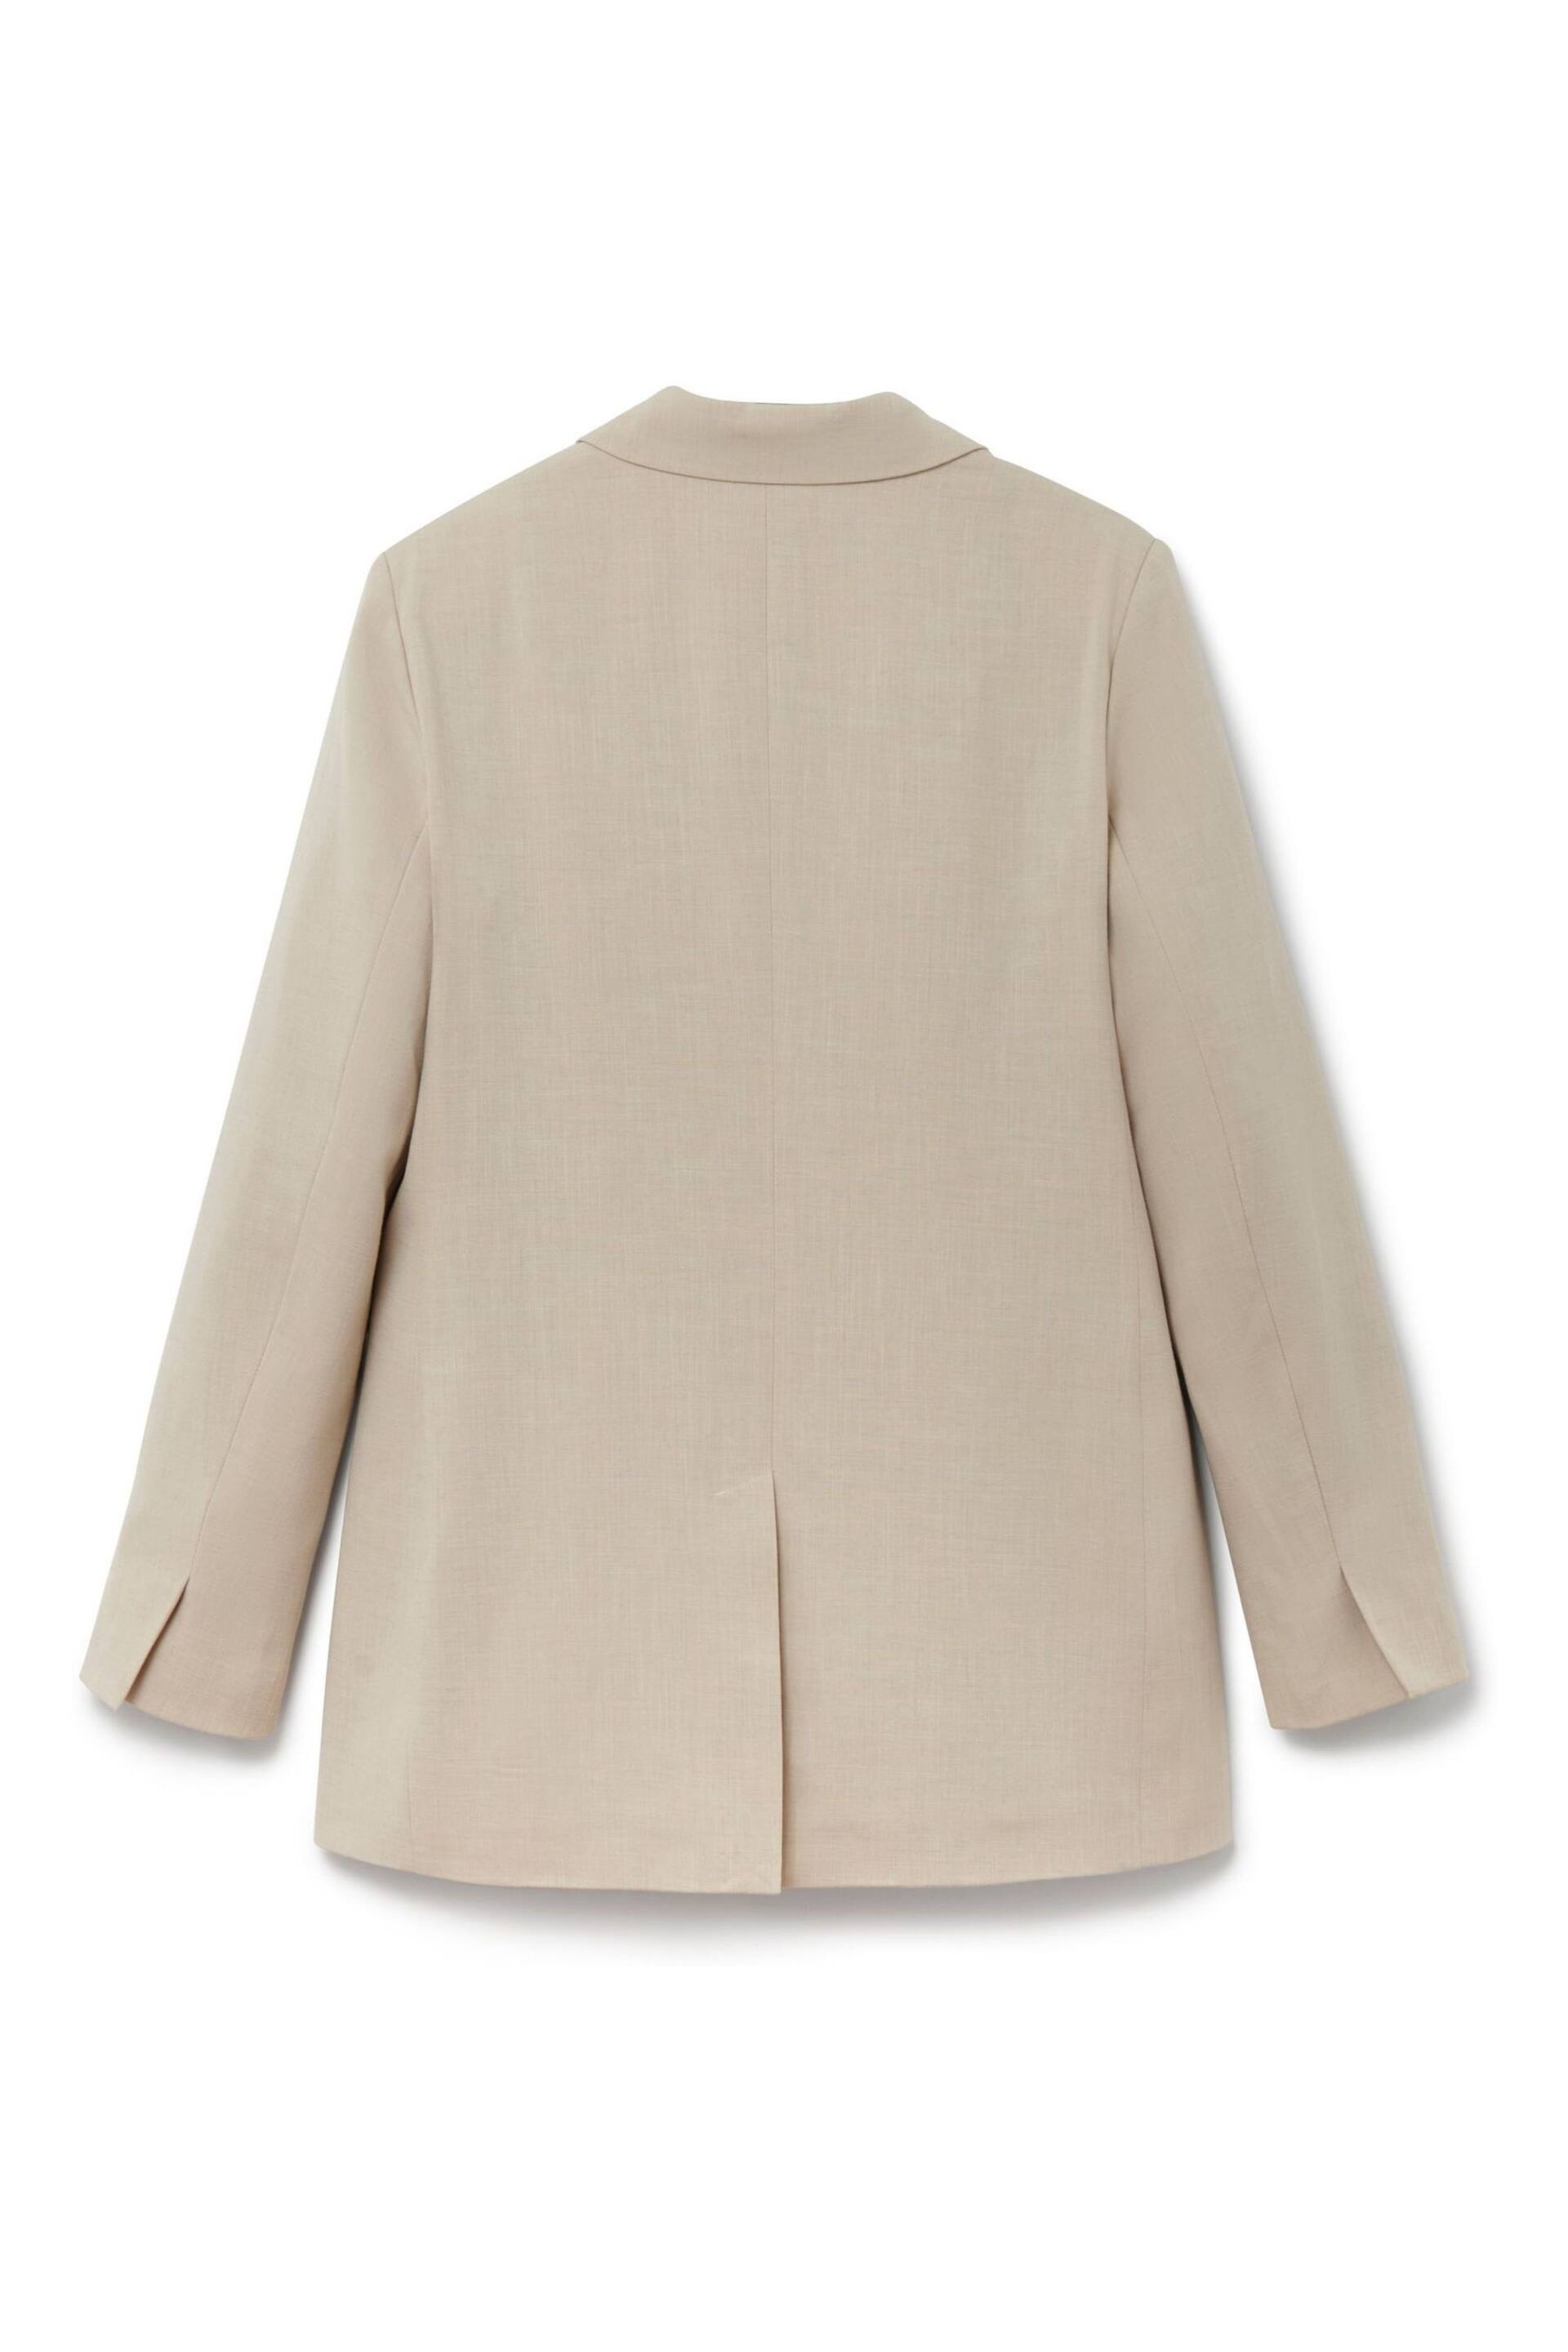 Another Sunday Oversized Linen Look Blazer In Stone - Image 5 of 6